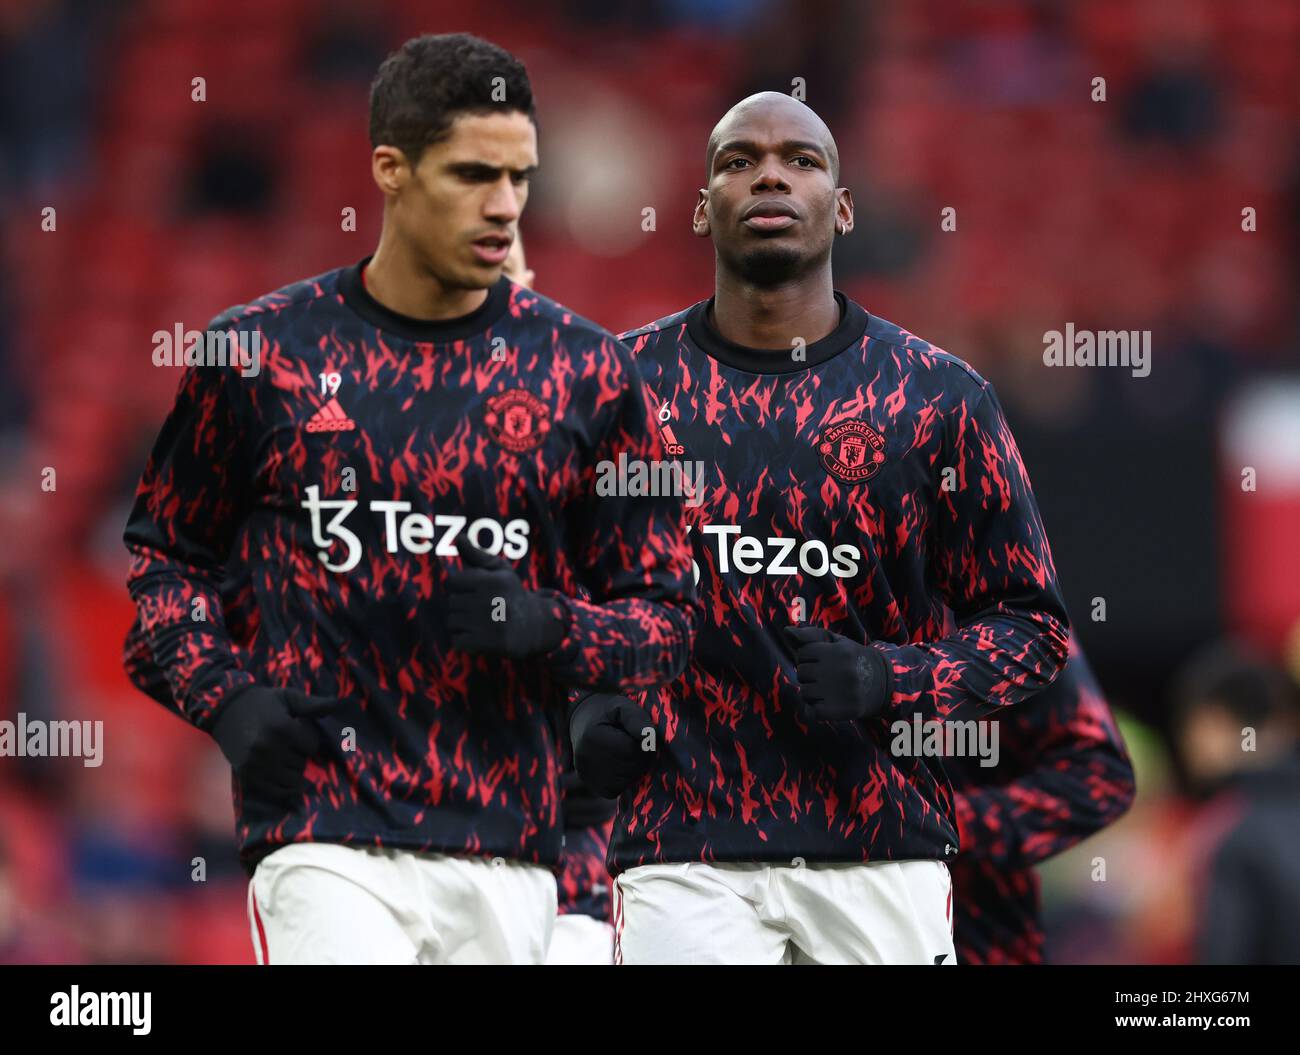 Manchester, England, 12th March 2022.   Paul Pogba of Manchester United warms up with his hair shaved off  during the Premier League match at Old Trafford, Manchester. Picture credit should read: Darren Staples / Sportimage Stock Photo